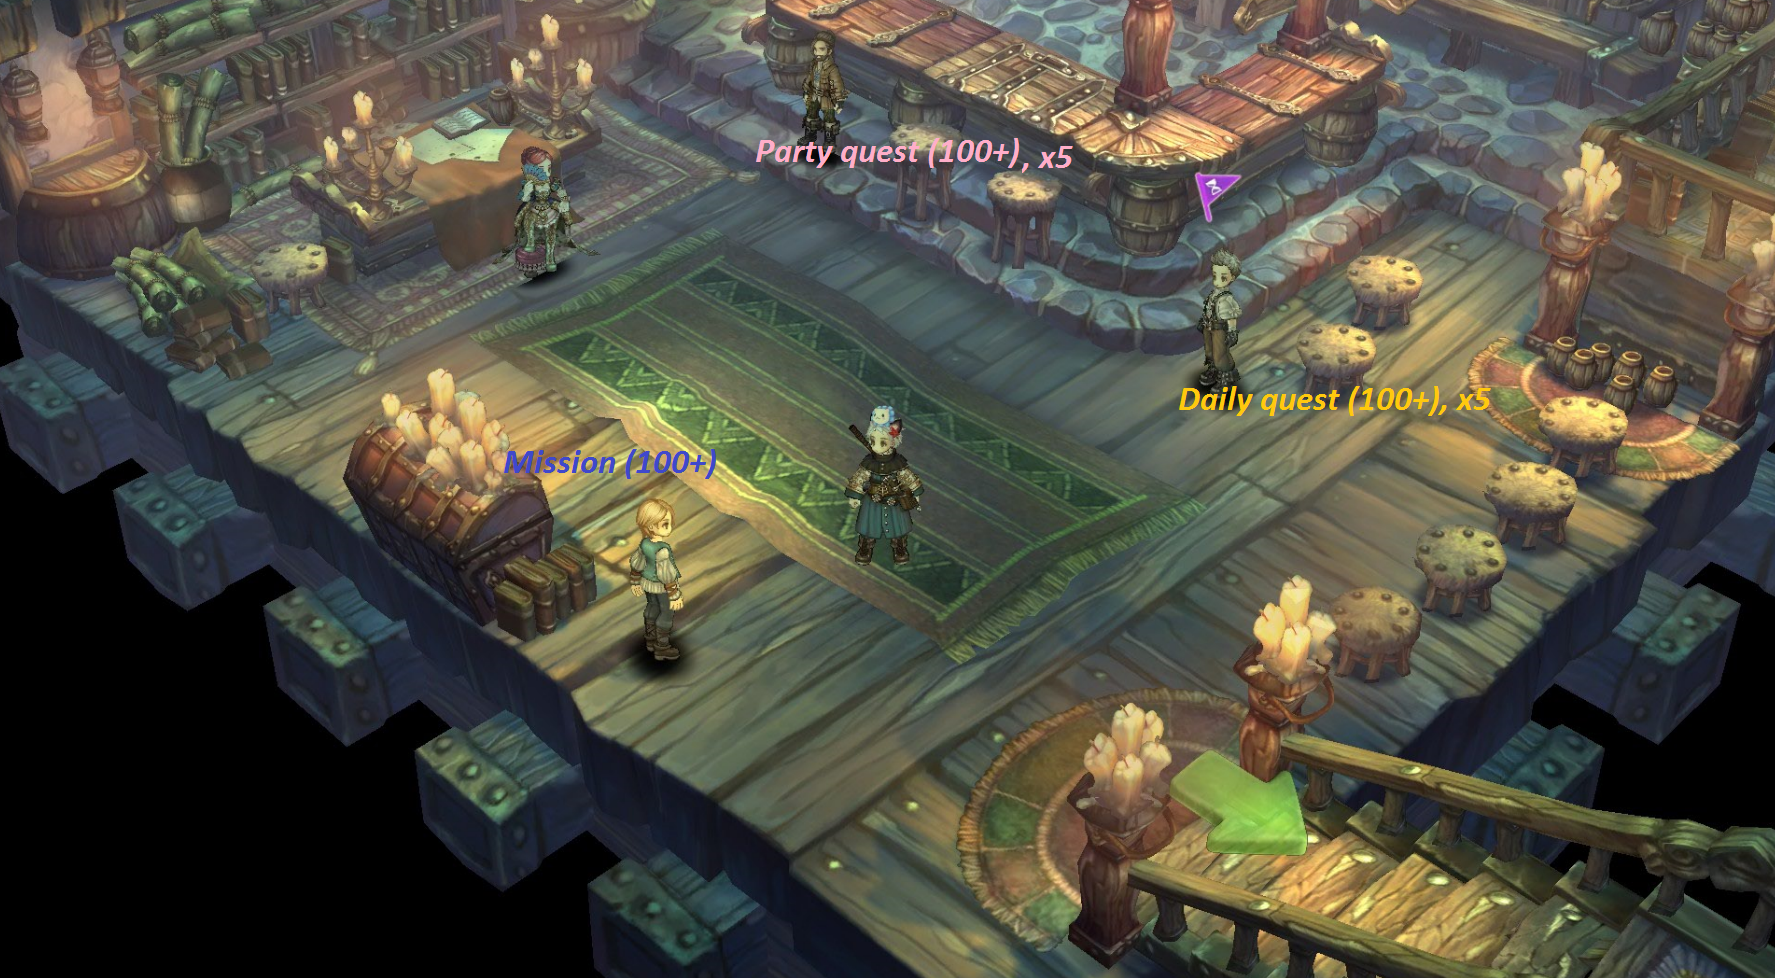 Monument of desire dungeon invisible wall - Game Content - Tree of Savior  Forum